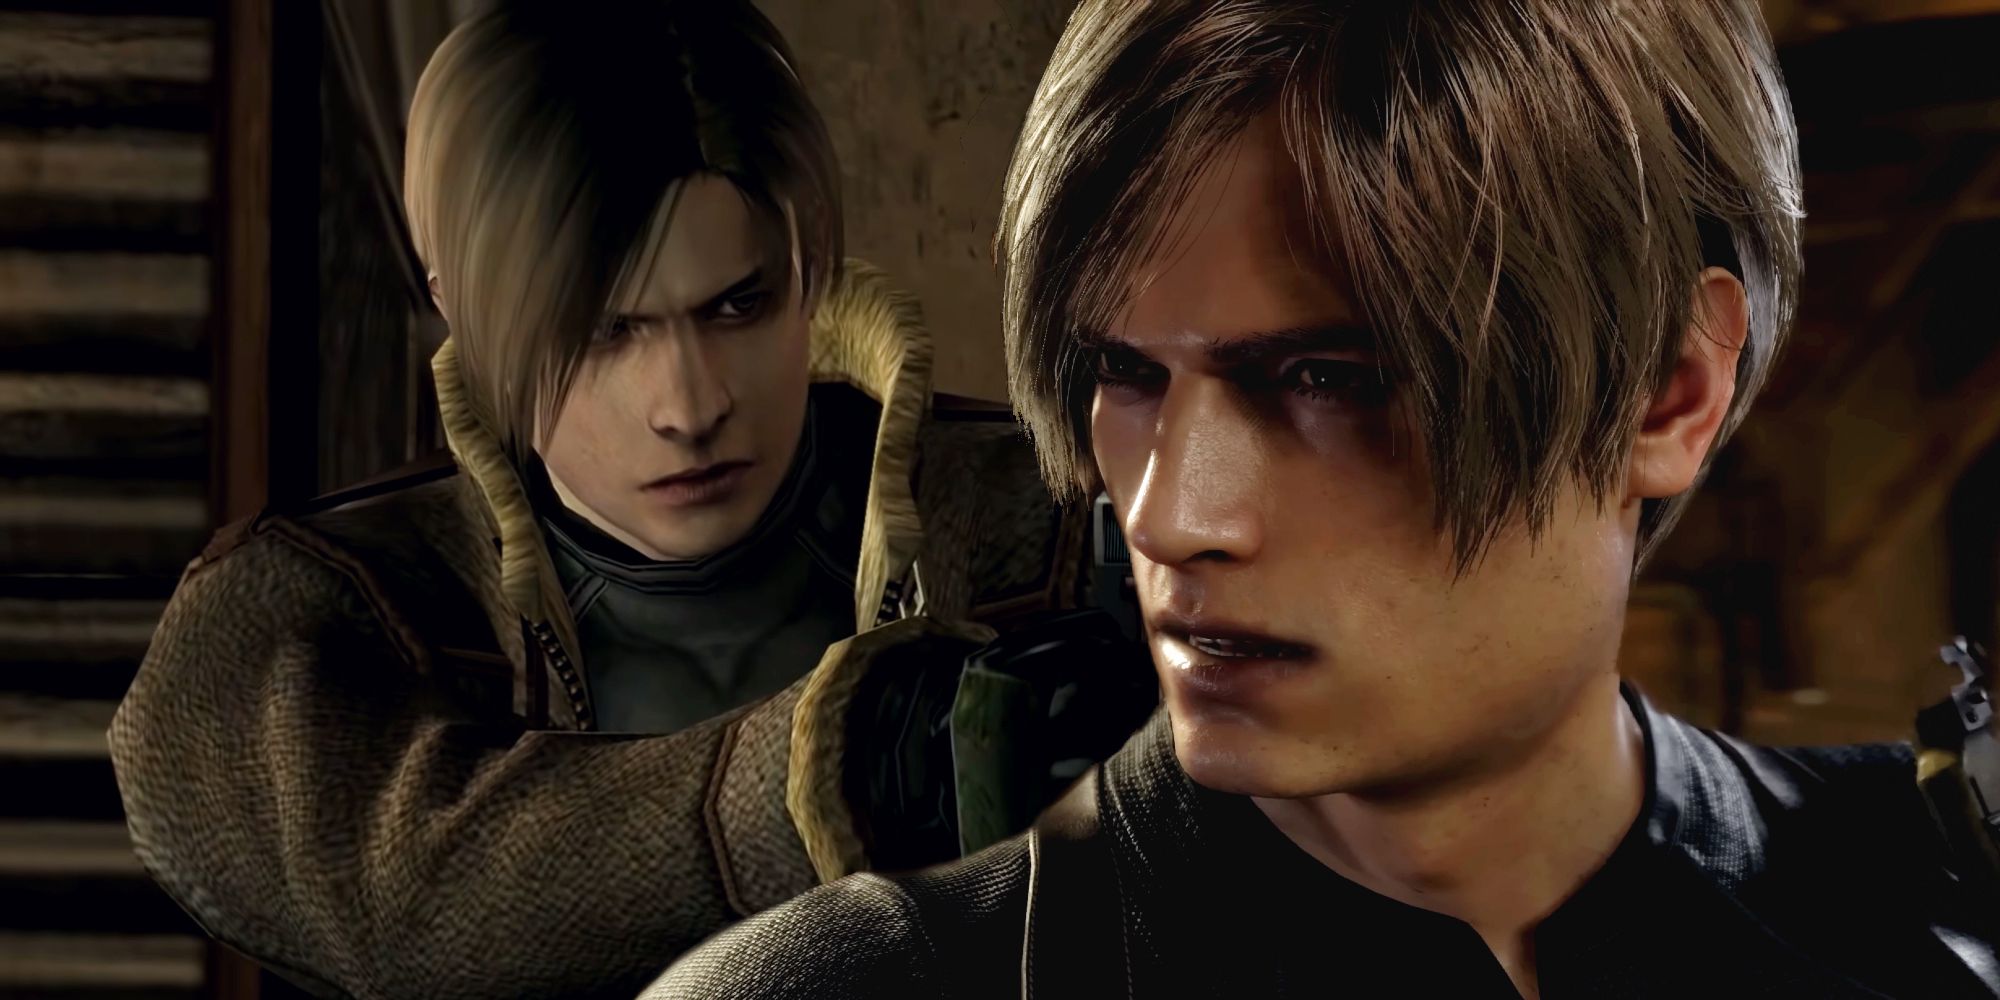 Leon Kennedy from the original Resident Evil 4 next to Leon from the Resident Evil 4 Remake.